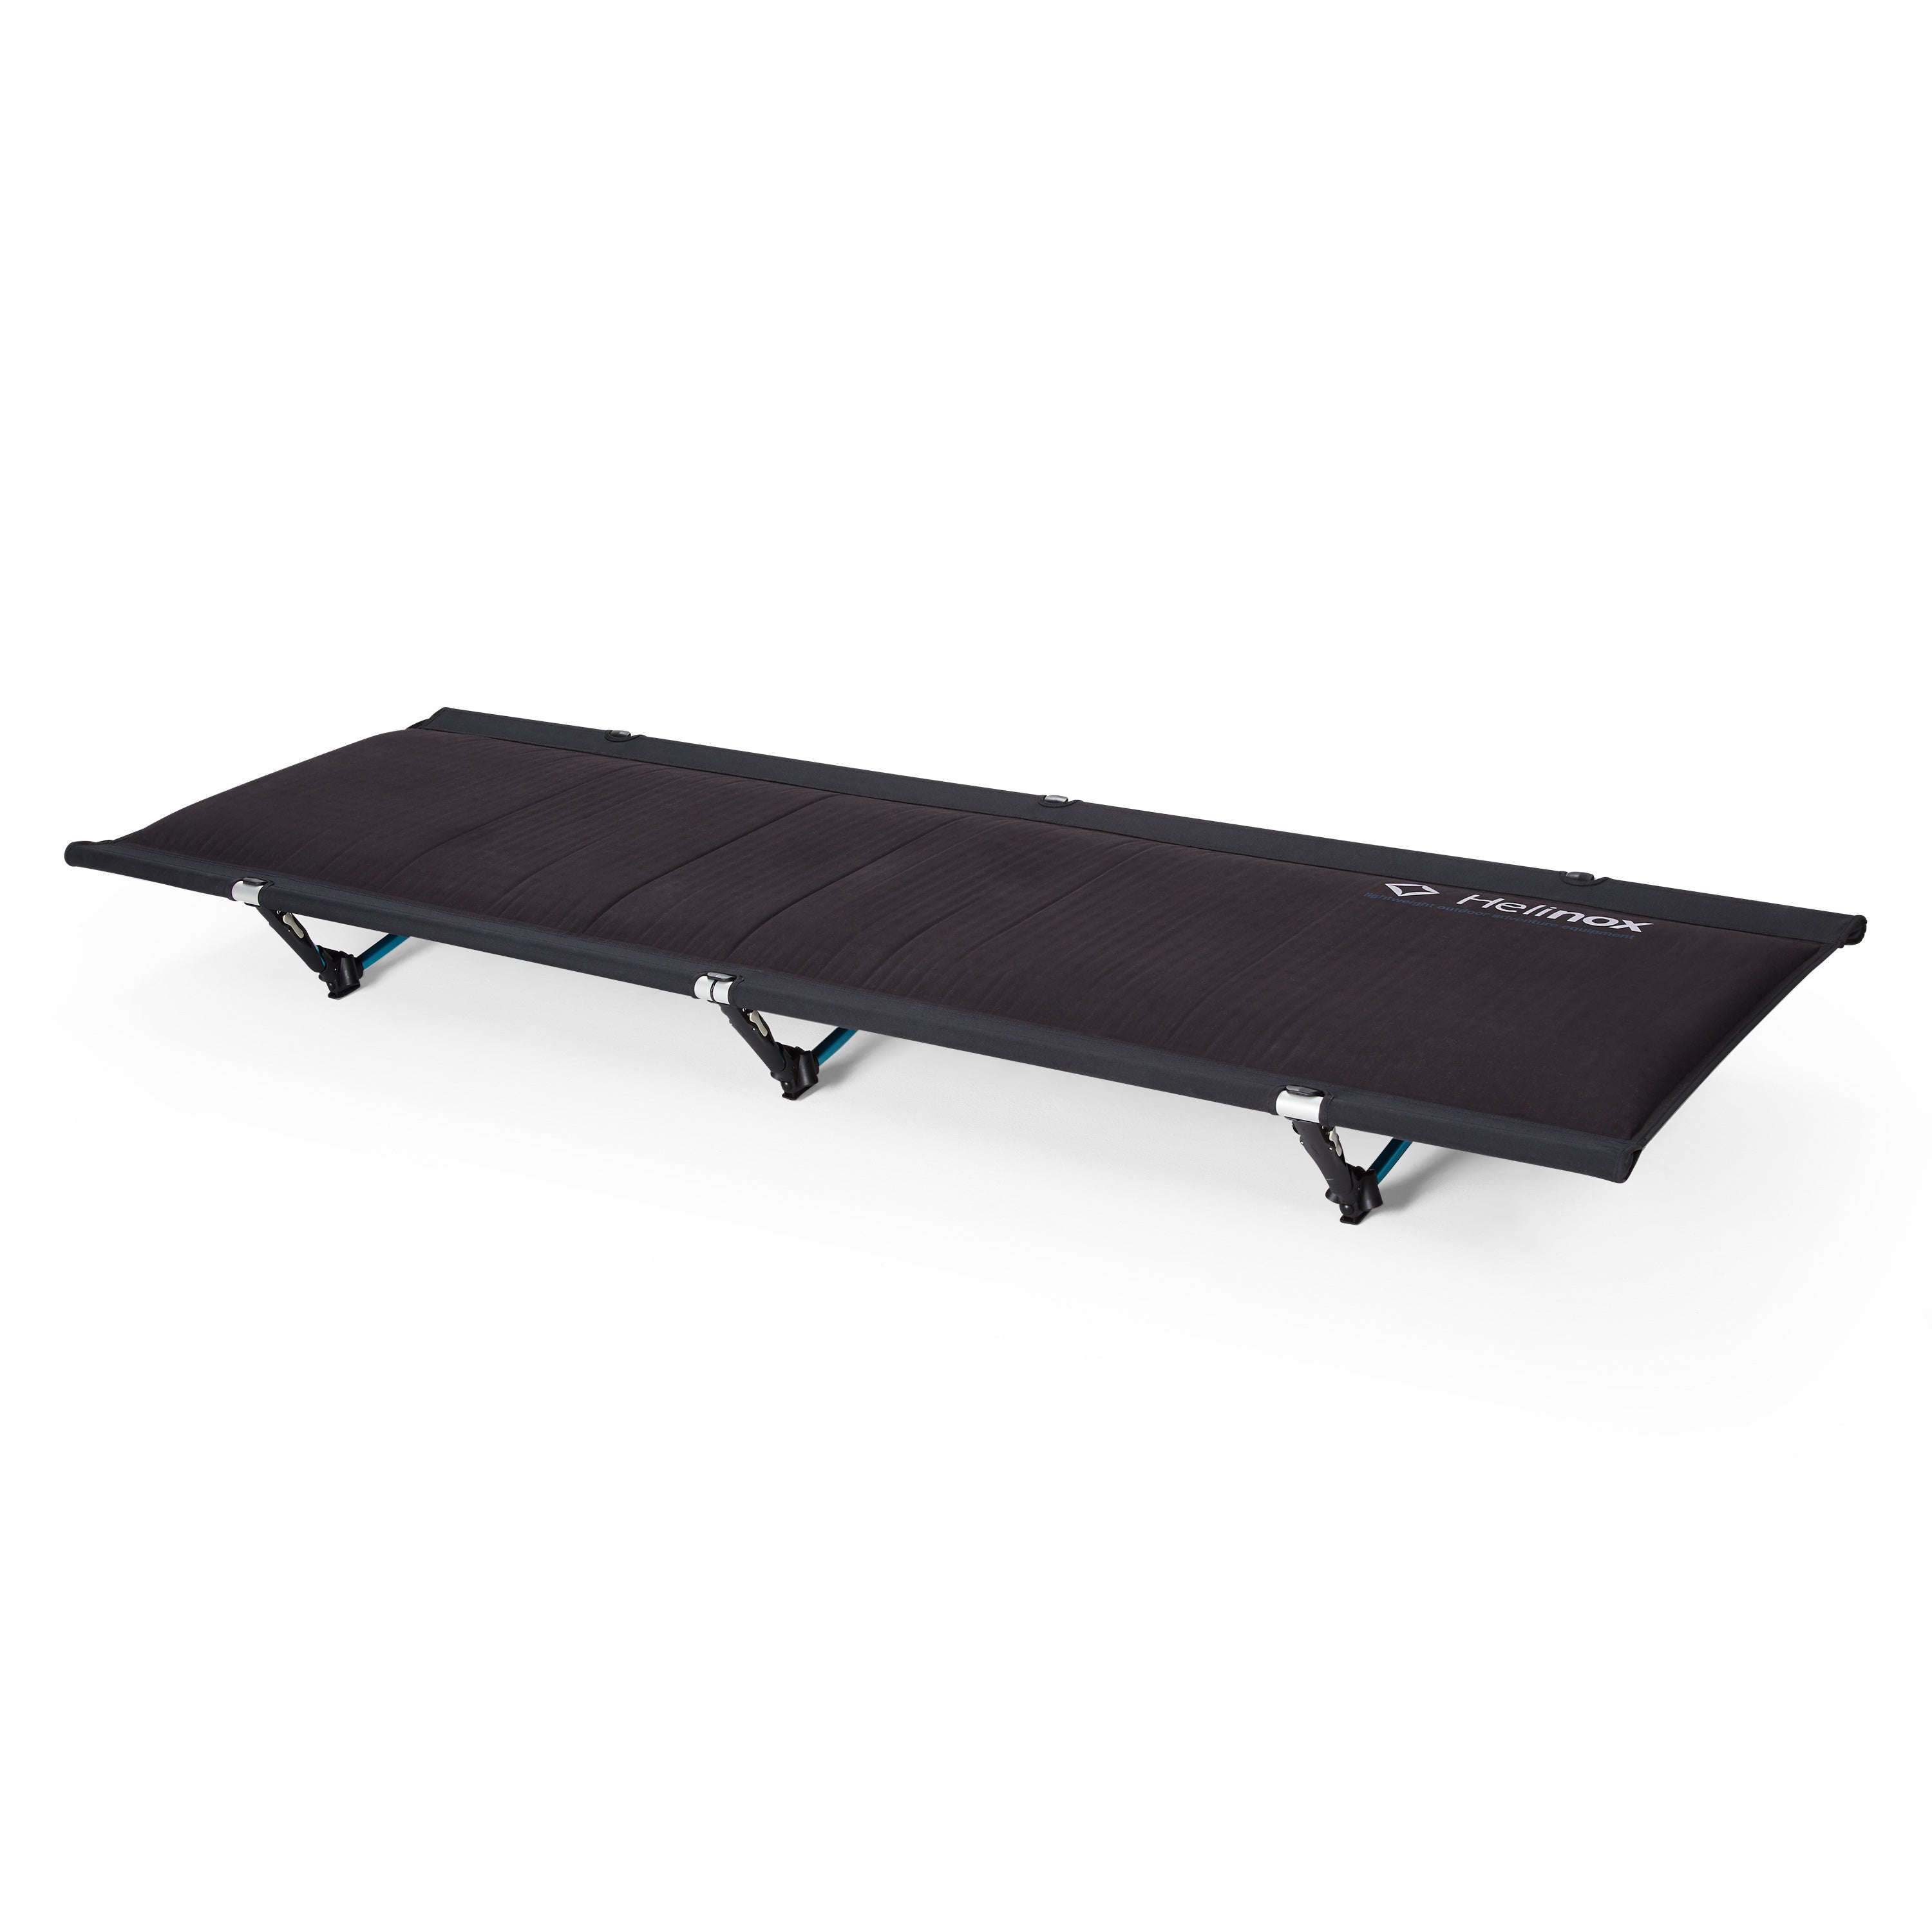 Insulated Cot One Pad (No Frame) - Black – HCC TOKYO - Helinox 